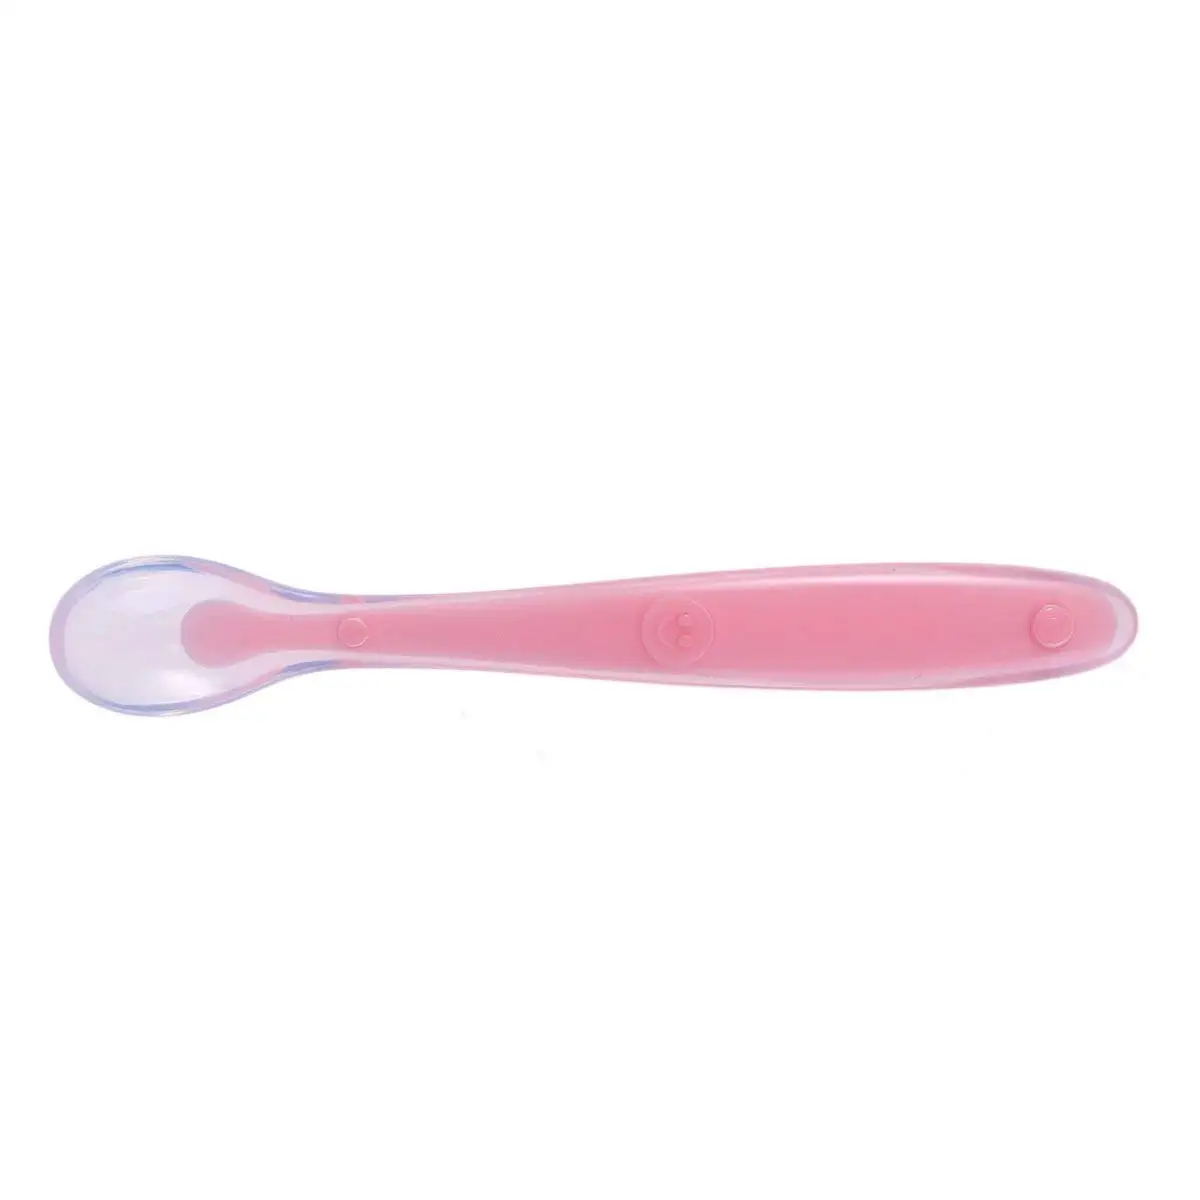 rubber tipped baby spoons